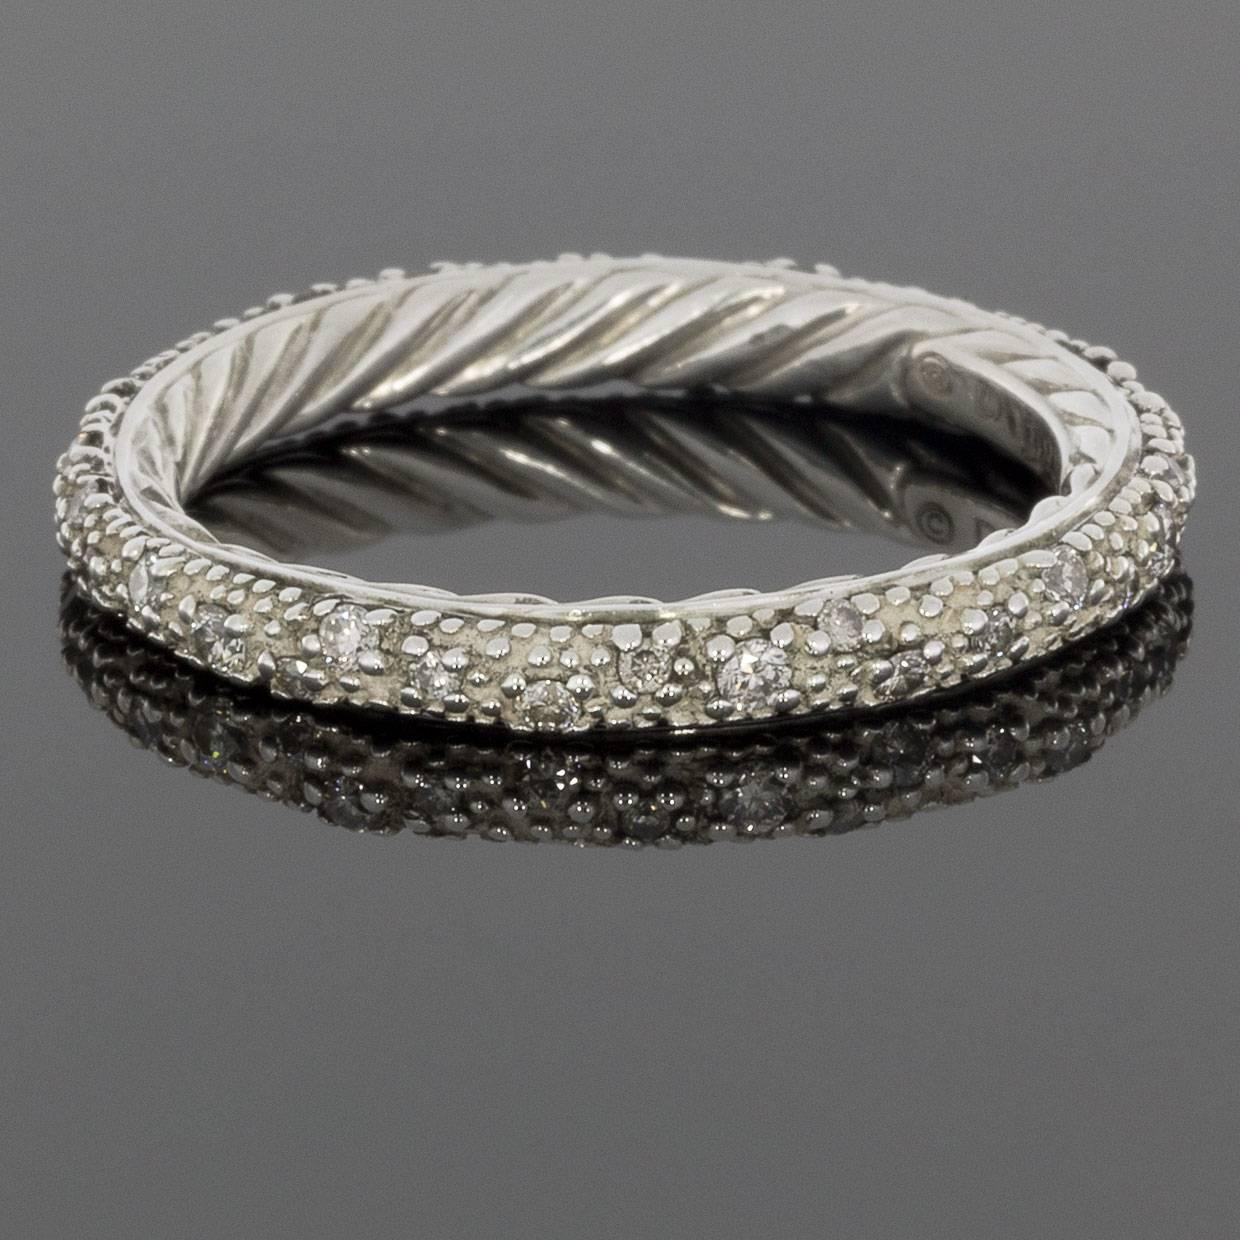 This beautiful David Yurman diamond stack ring is comprised of 925 sterling silver and features round diamonds that are pave set. MSRP $825!

Details:
David Yurman
925 Sterling Silver
Pave Set Round Diamonds
Ring Size 7
MSRP $825!
Comes in a